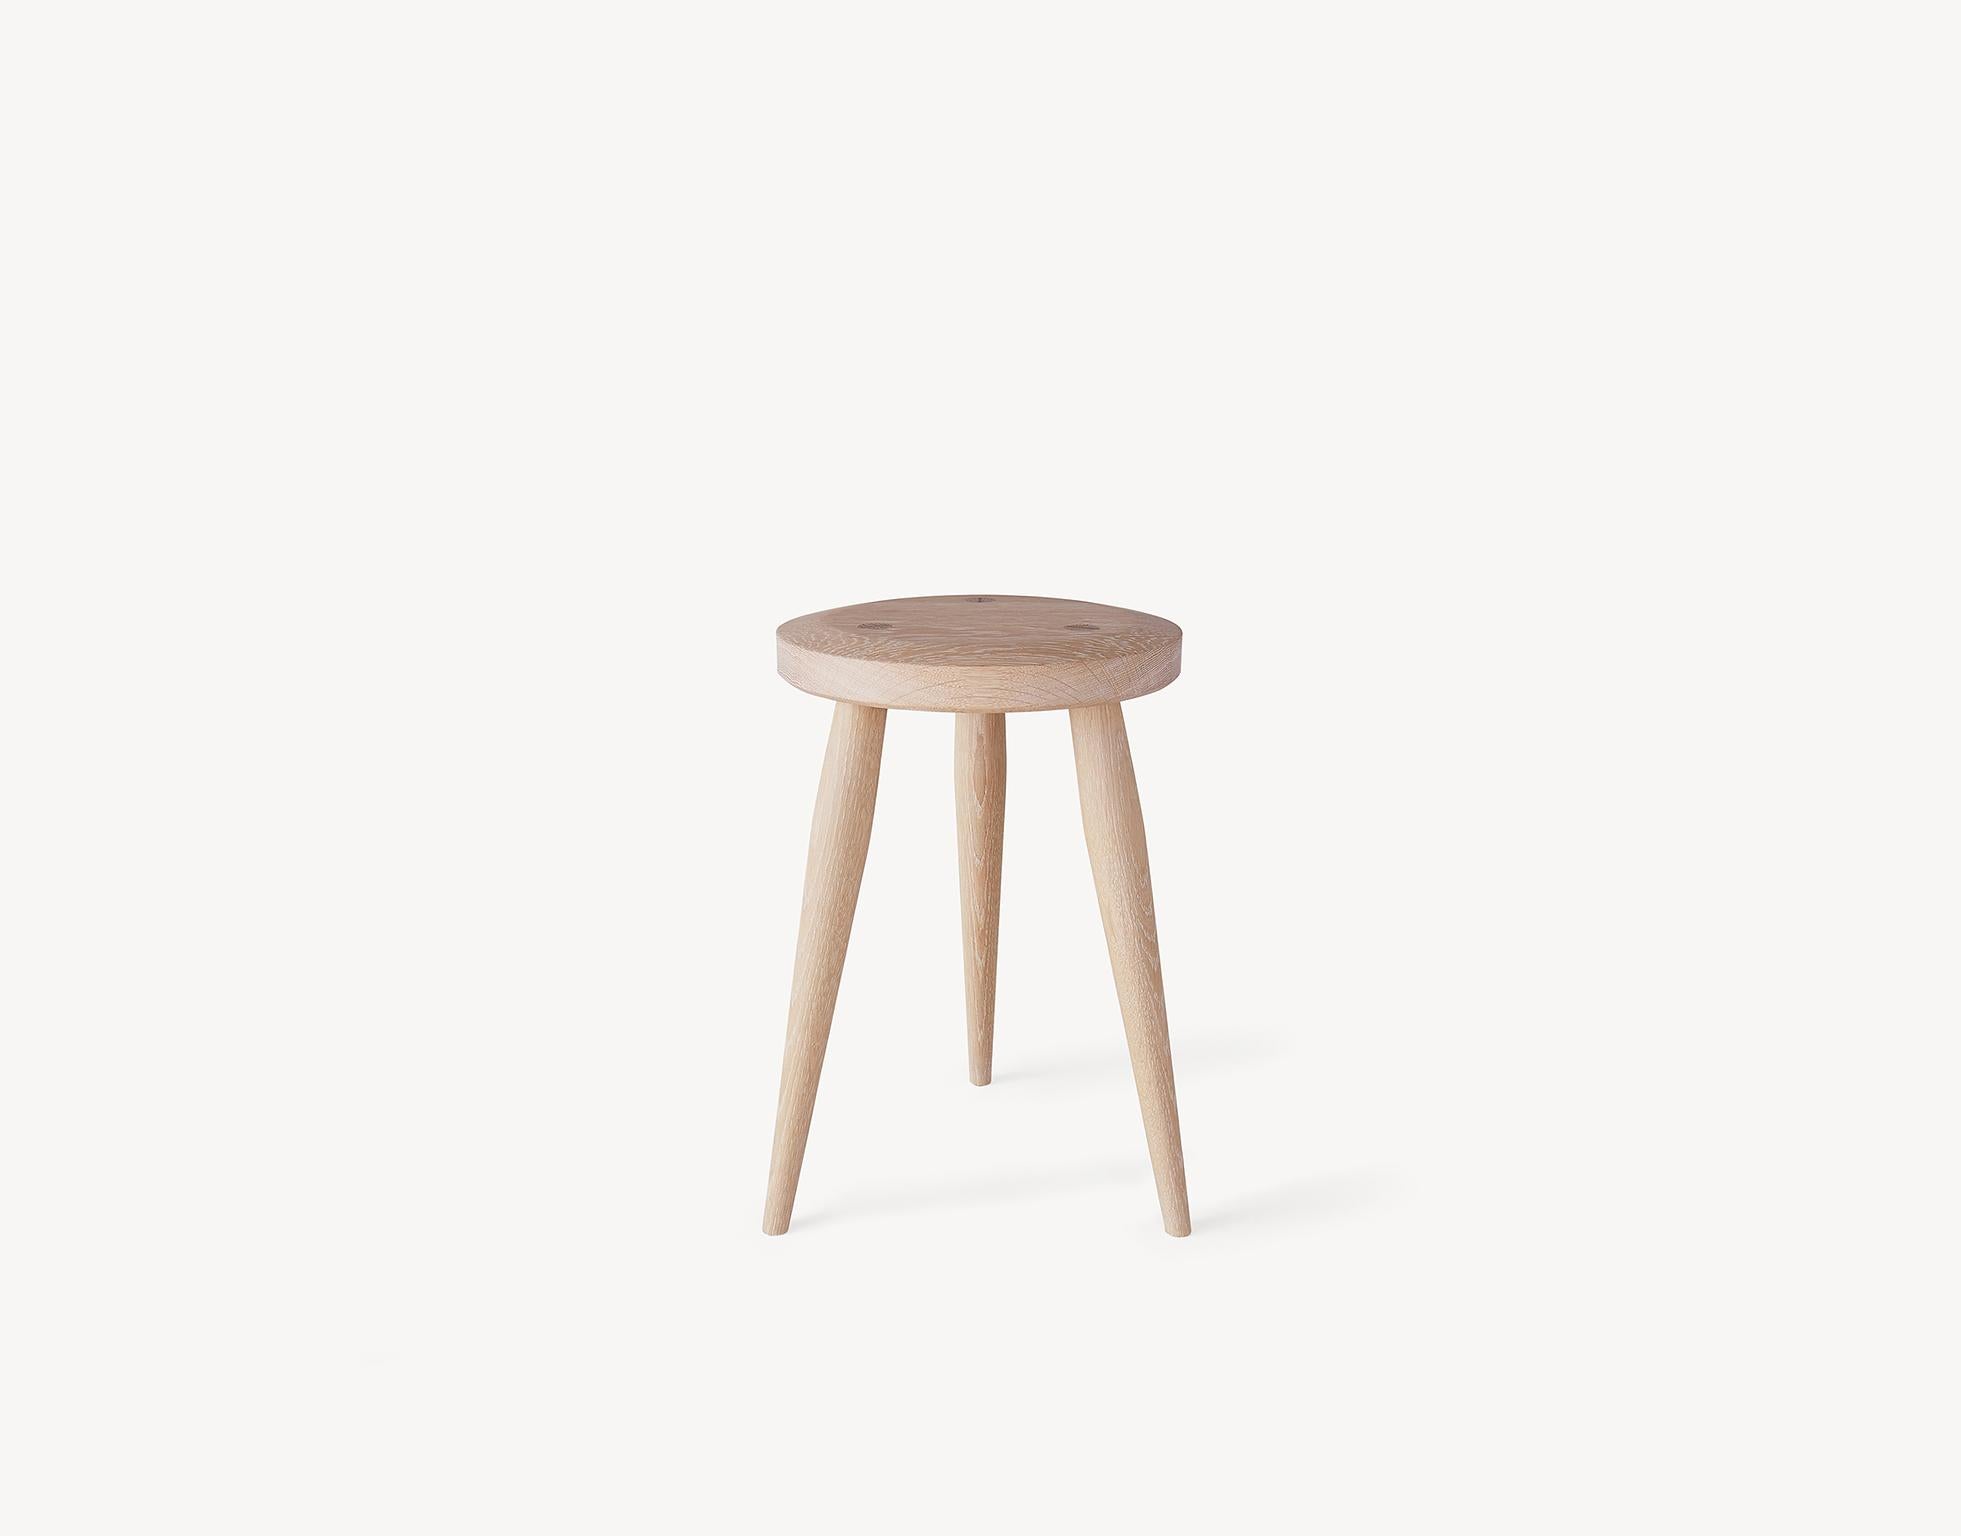 Canadian Minimalist Stool by Coolican & Company